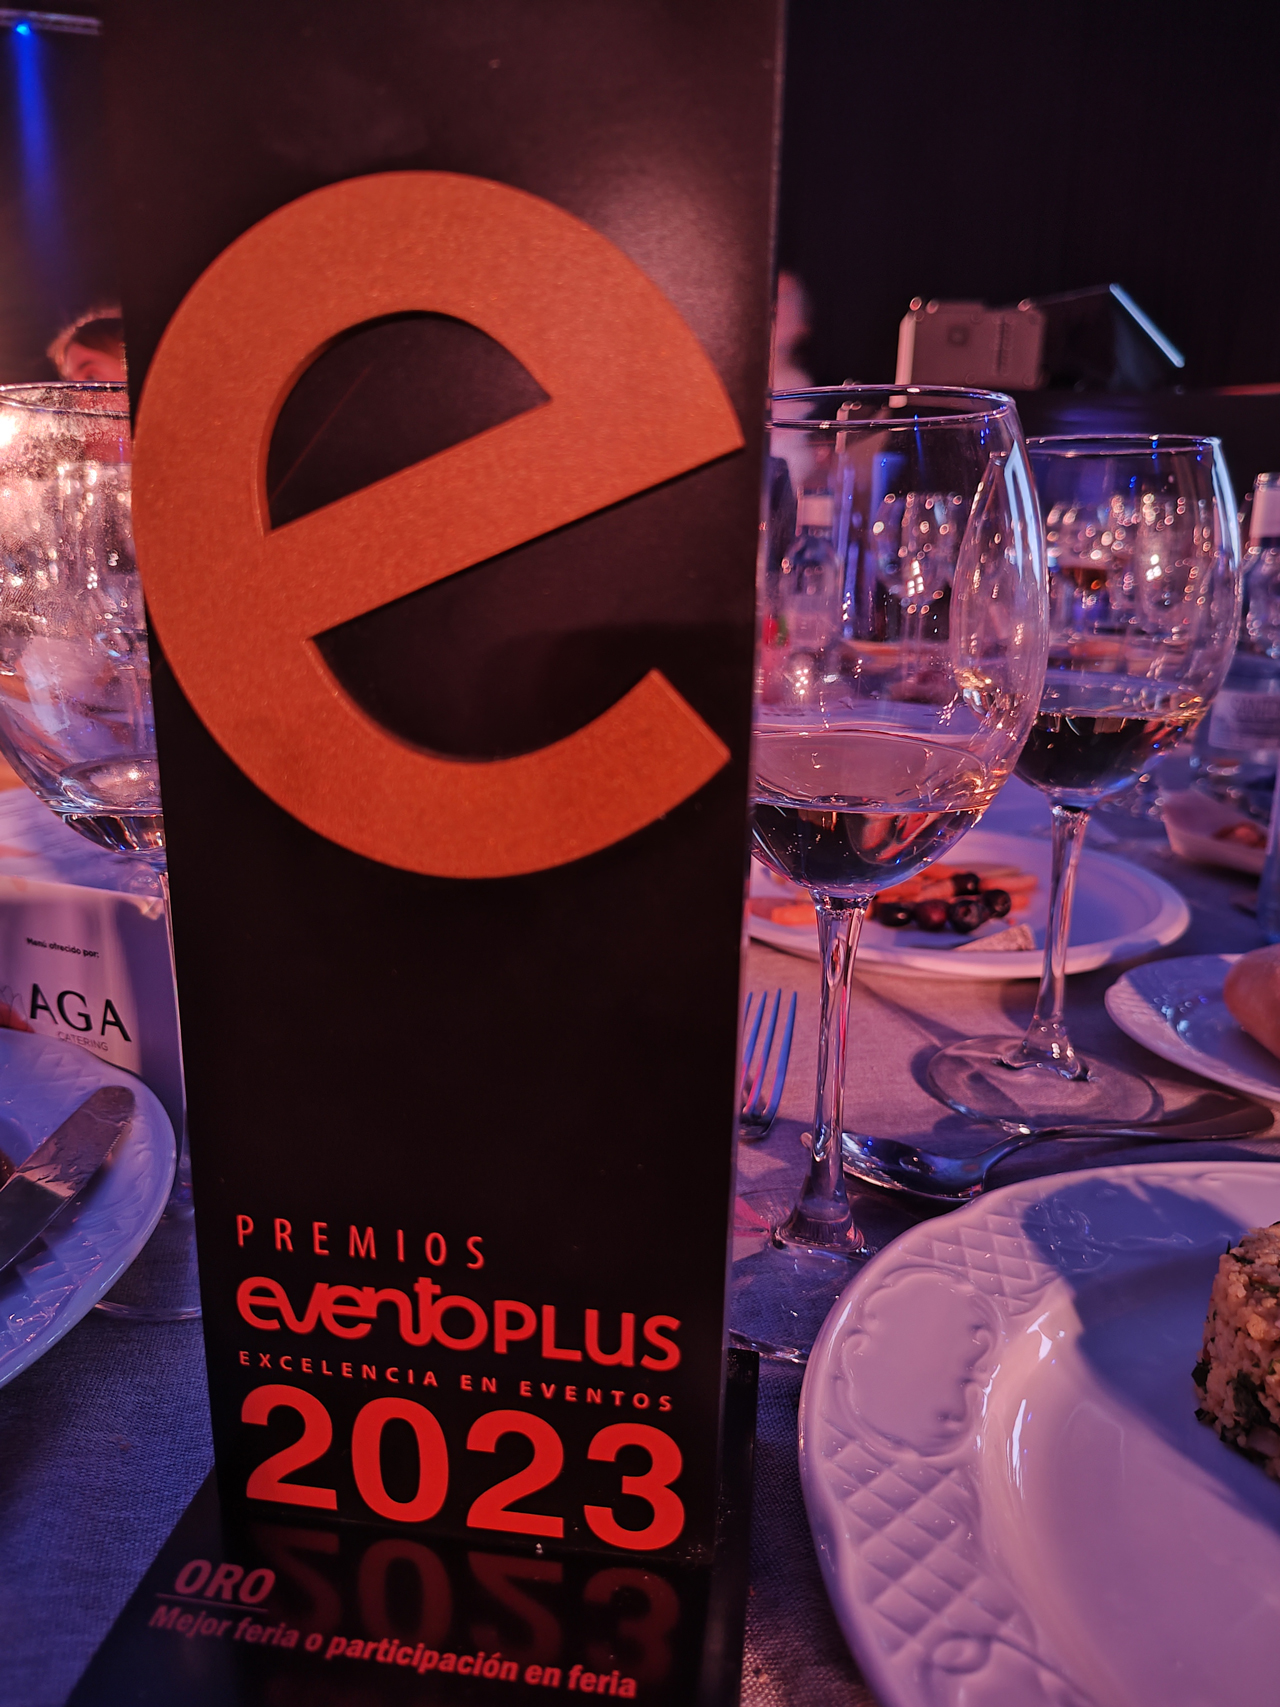 The 18th edition of the Eventoplus Awards Gala